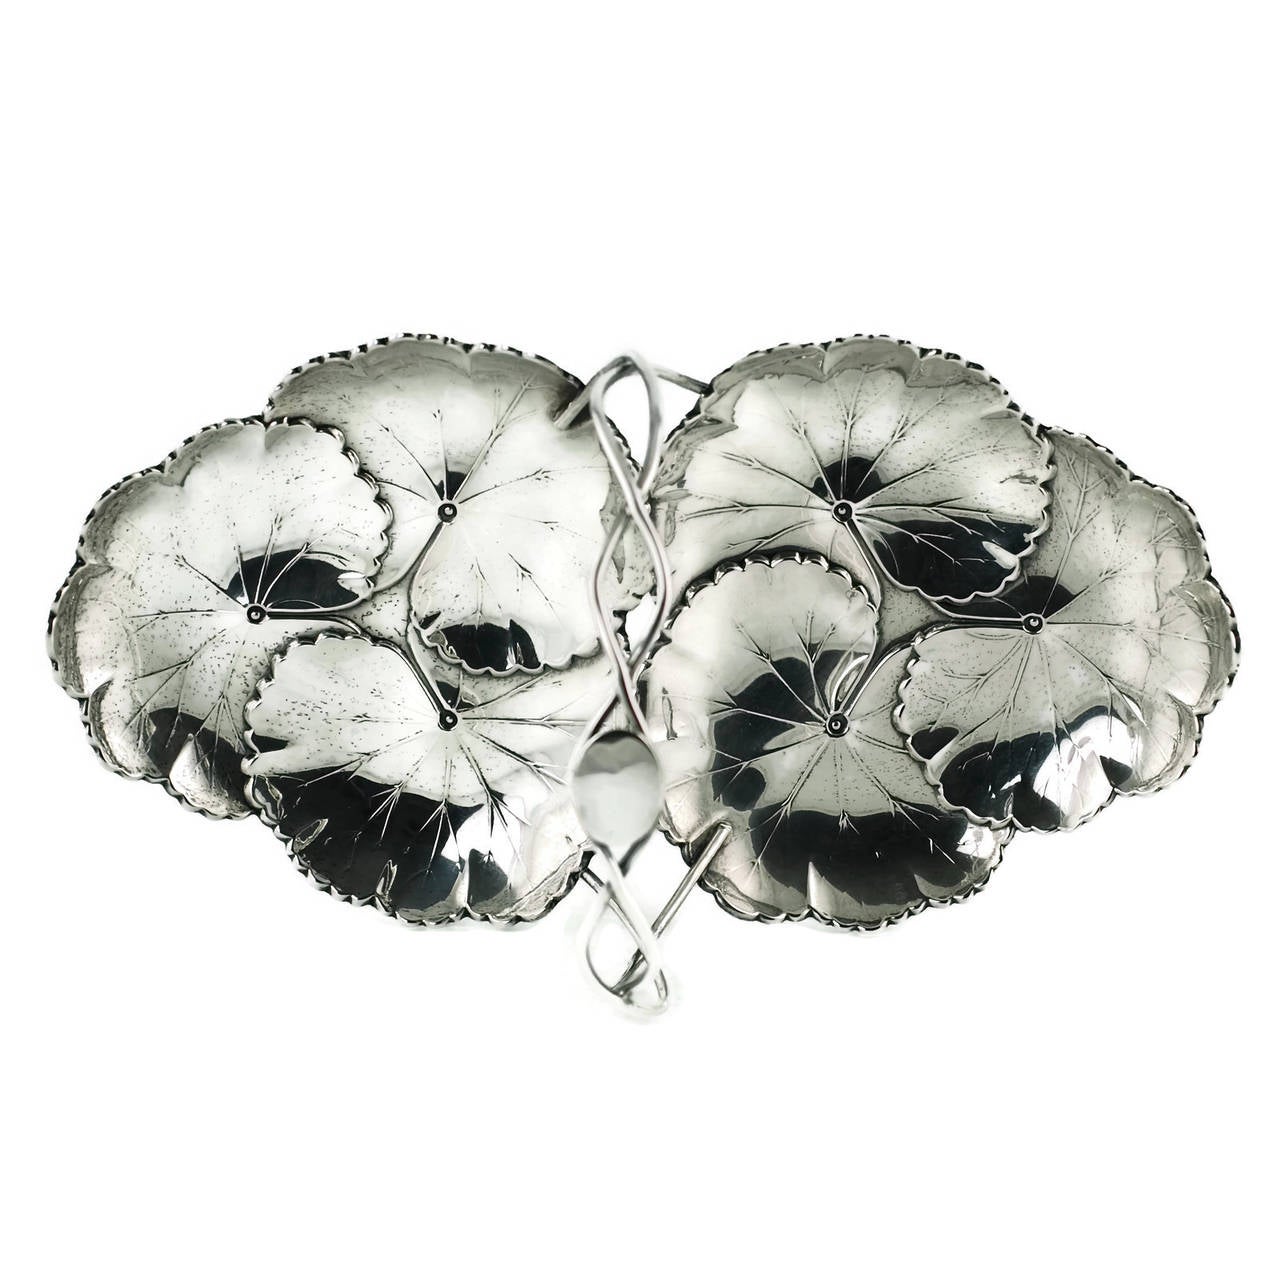 American Reed and Barton Sterling Silver Two-Part Lily Pad Dish with Intertwined Handle